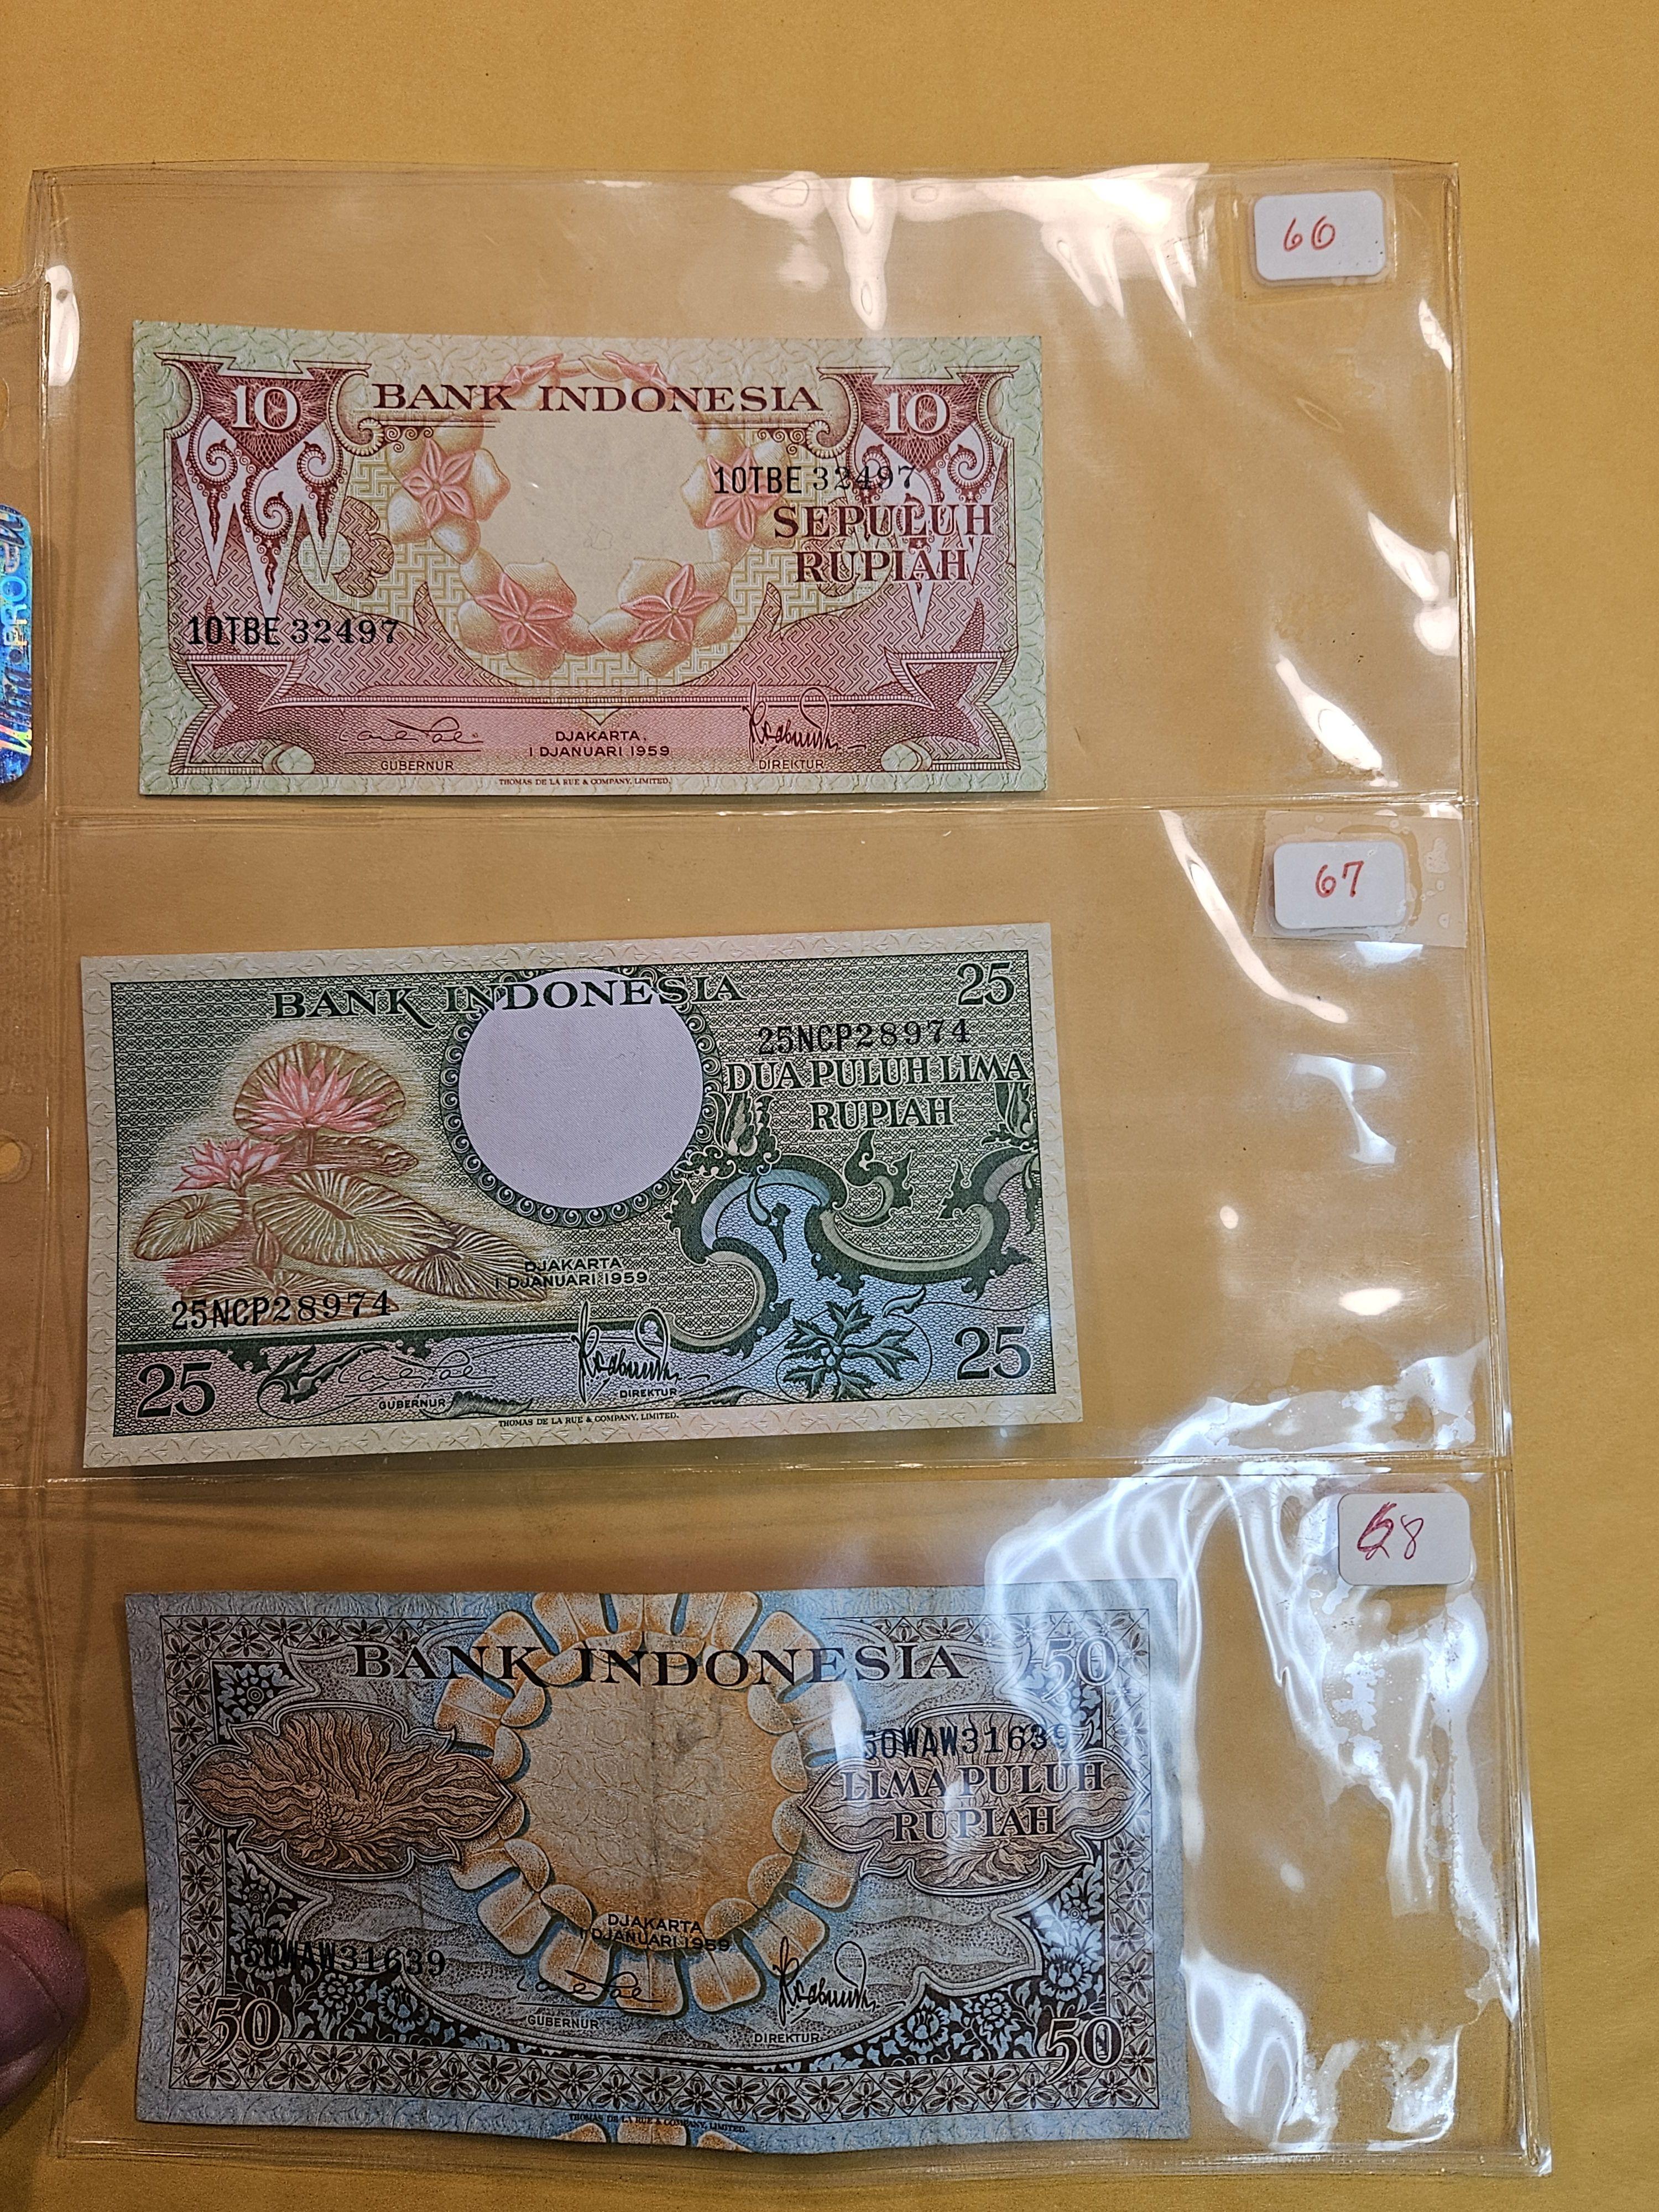 Twenty-five nice notes from Indonesia